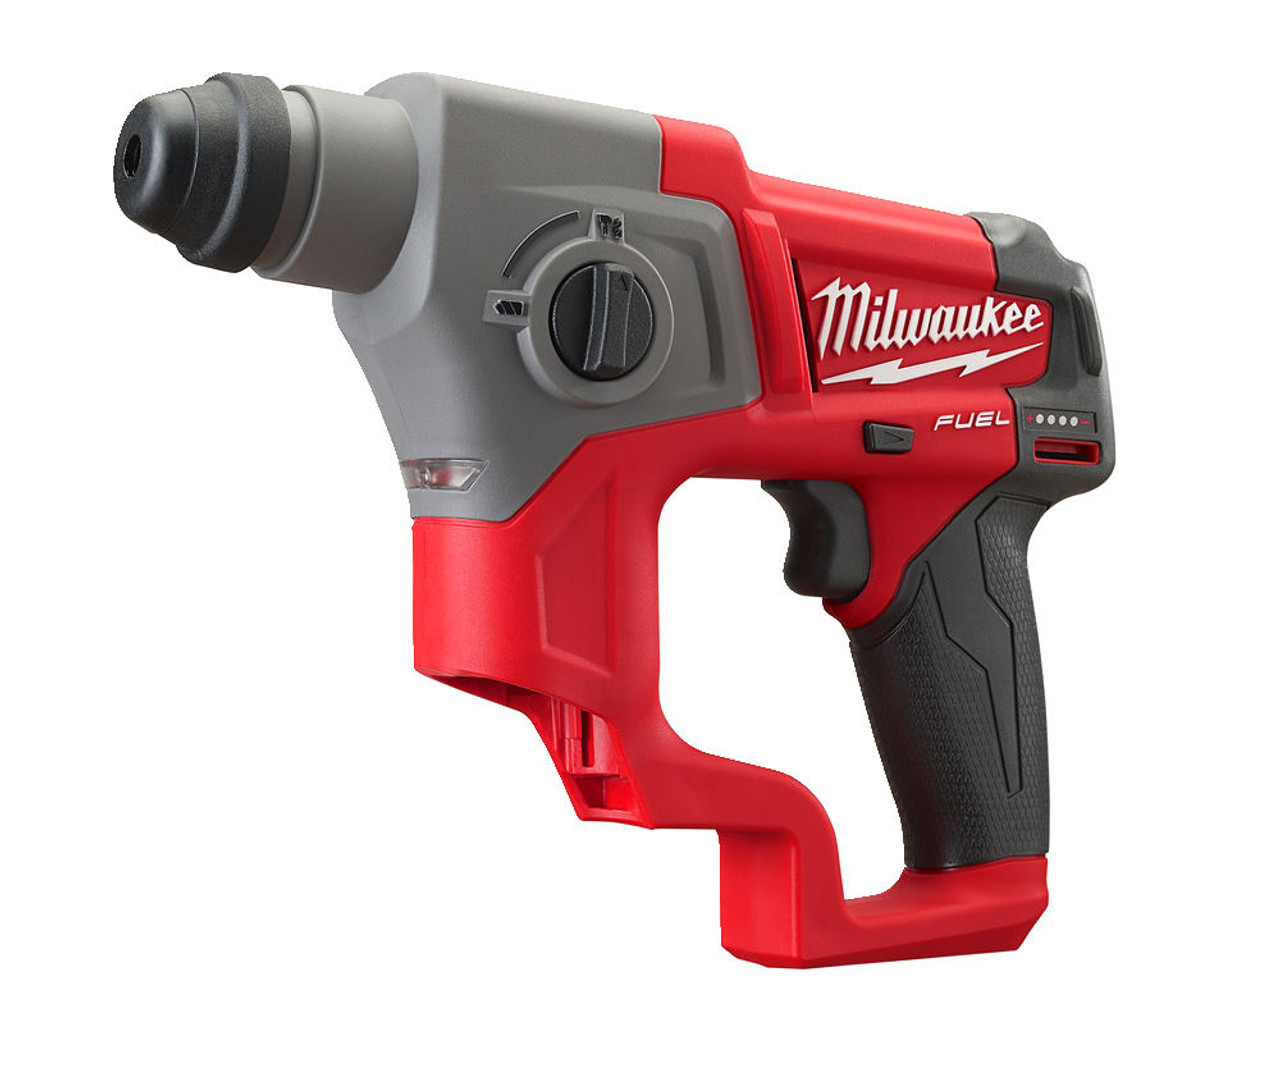 Milwaukee m12 fuel sds hammer drill for diy